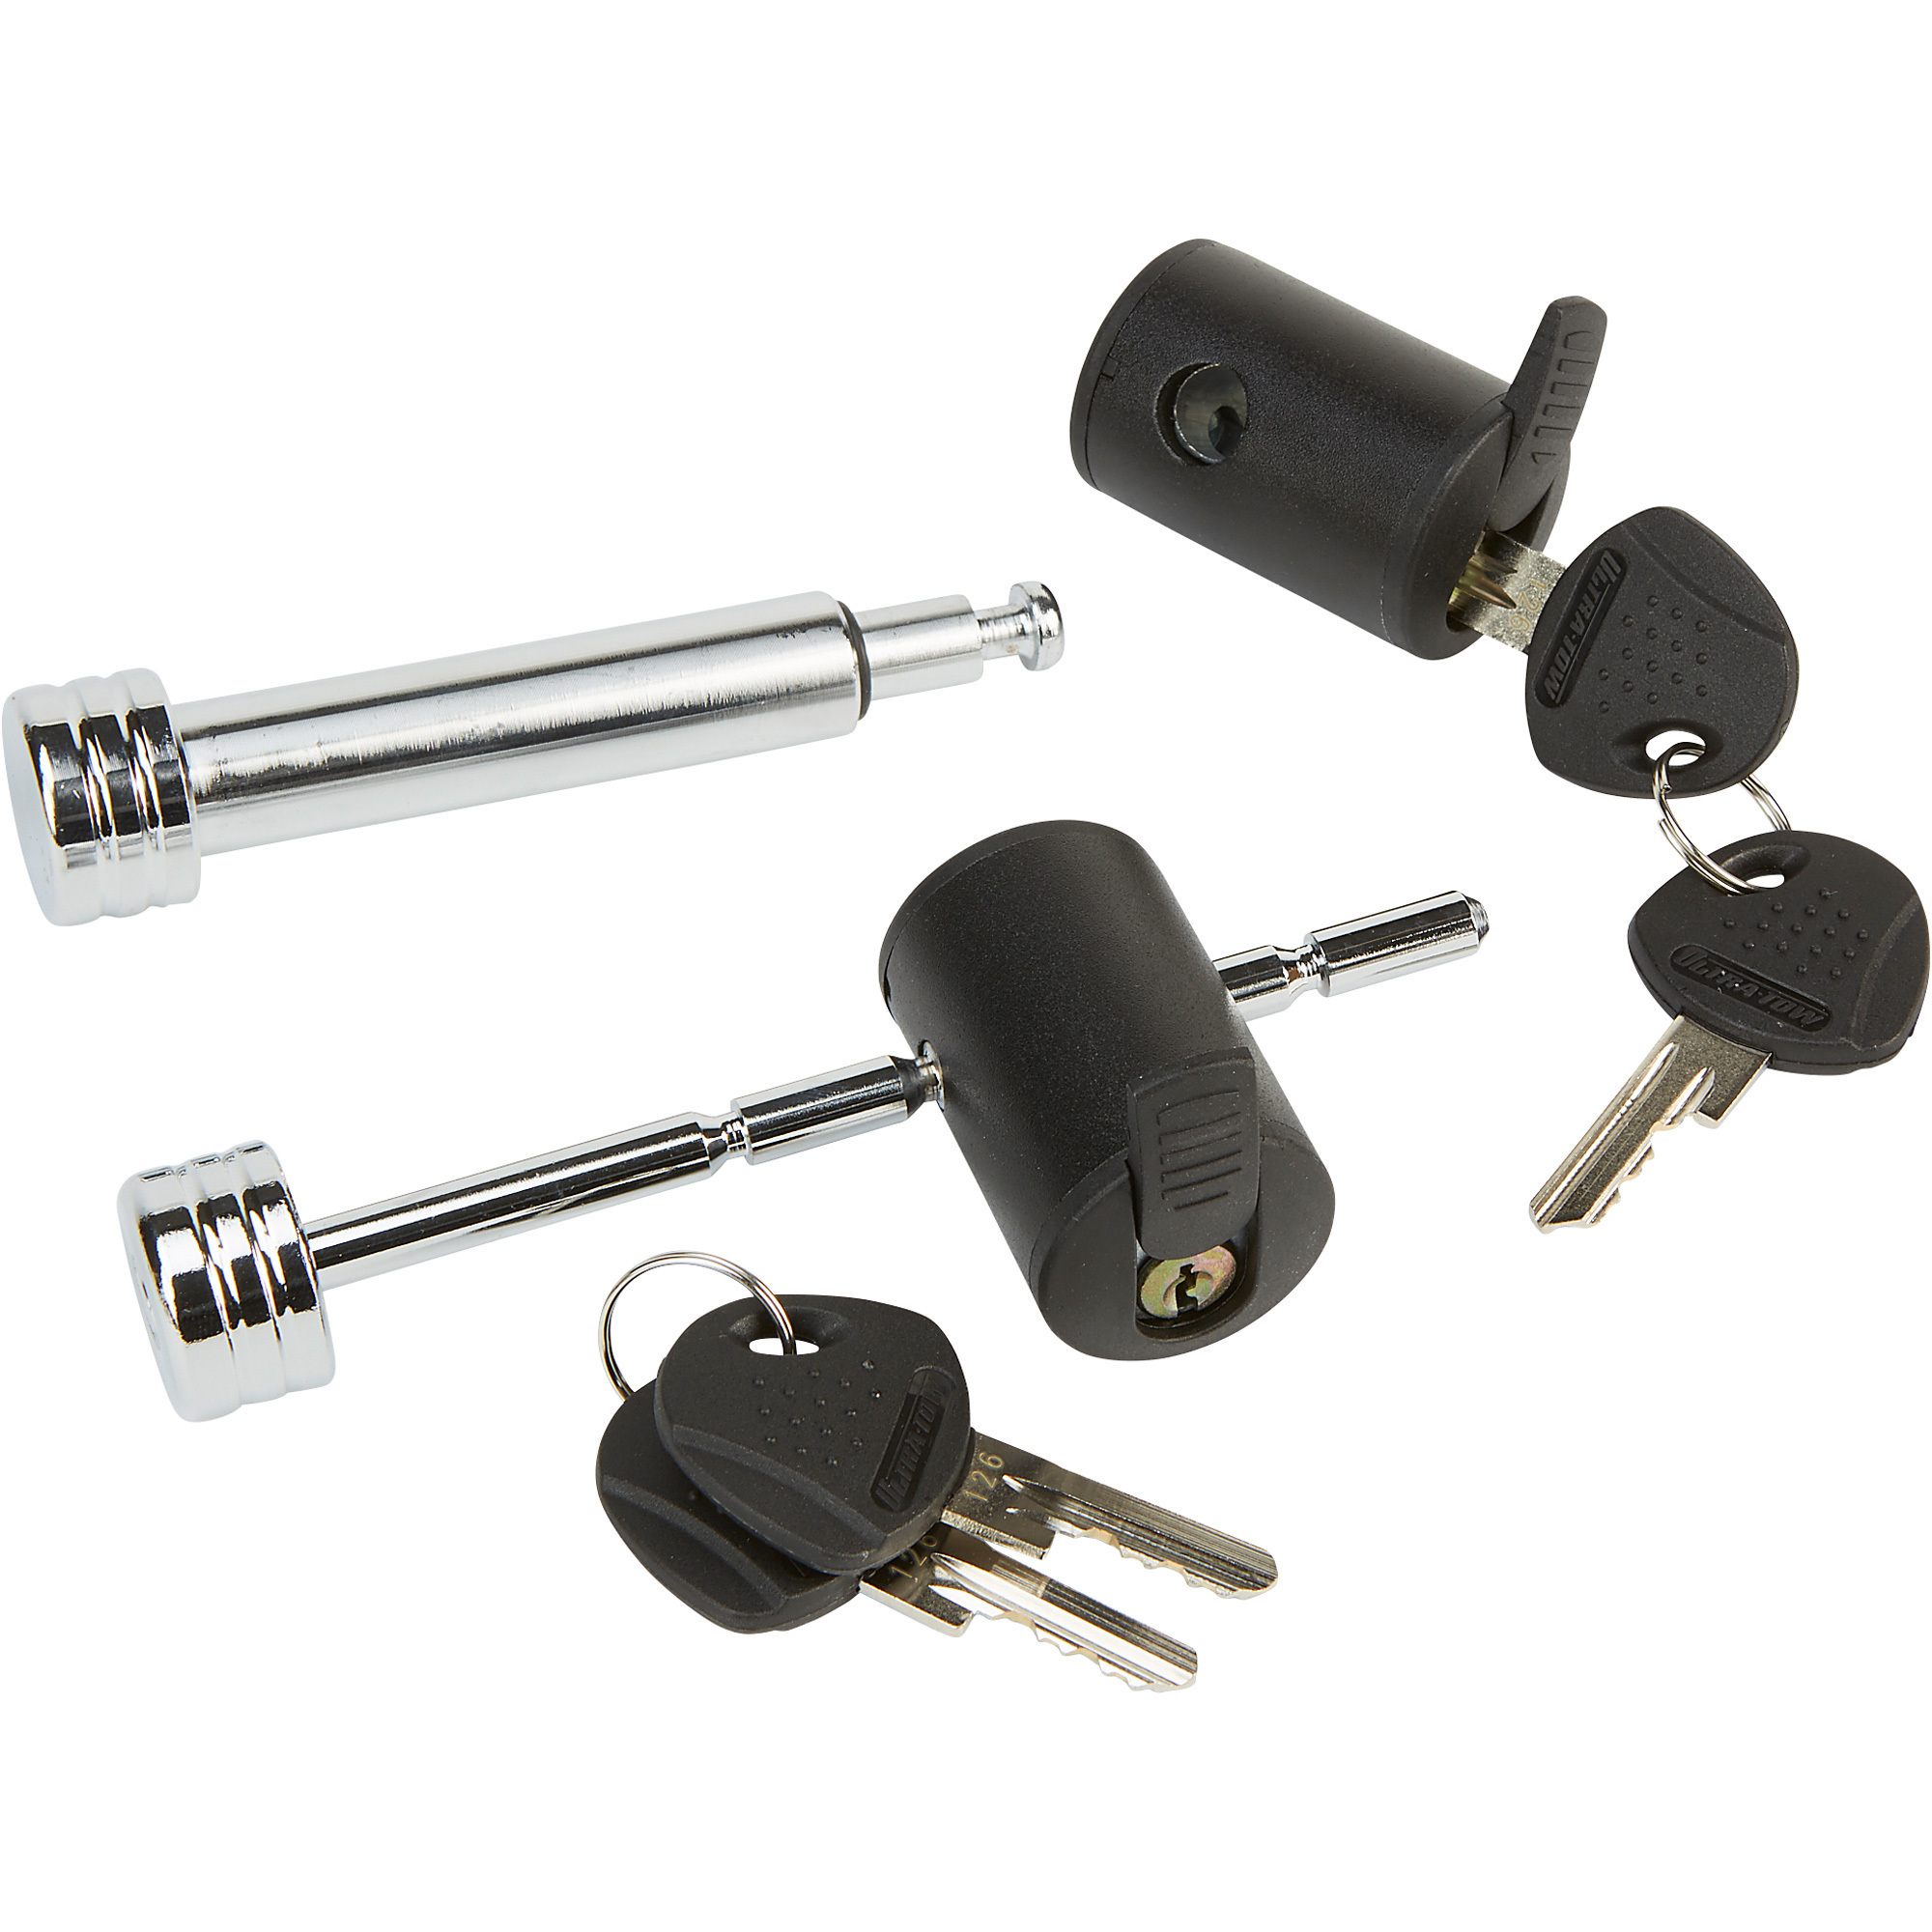 Ultra-Tow 5/8Inch Right Angle Locking Hitch Pin and Coupler Lock Set